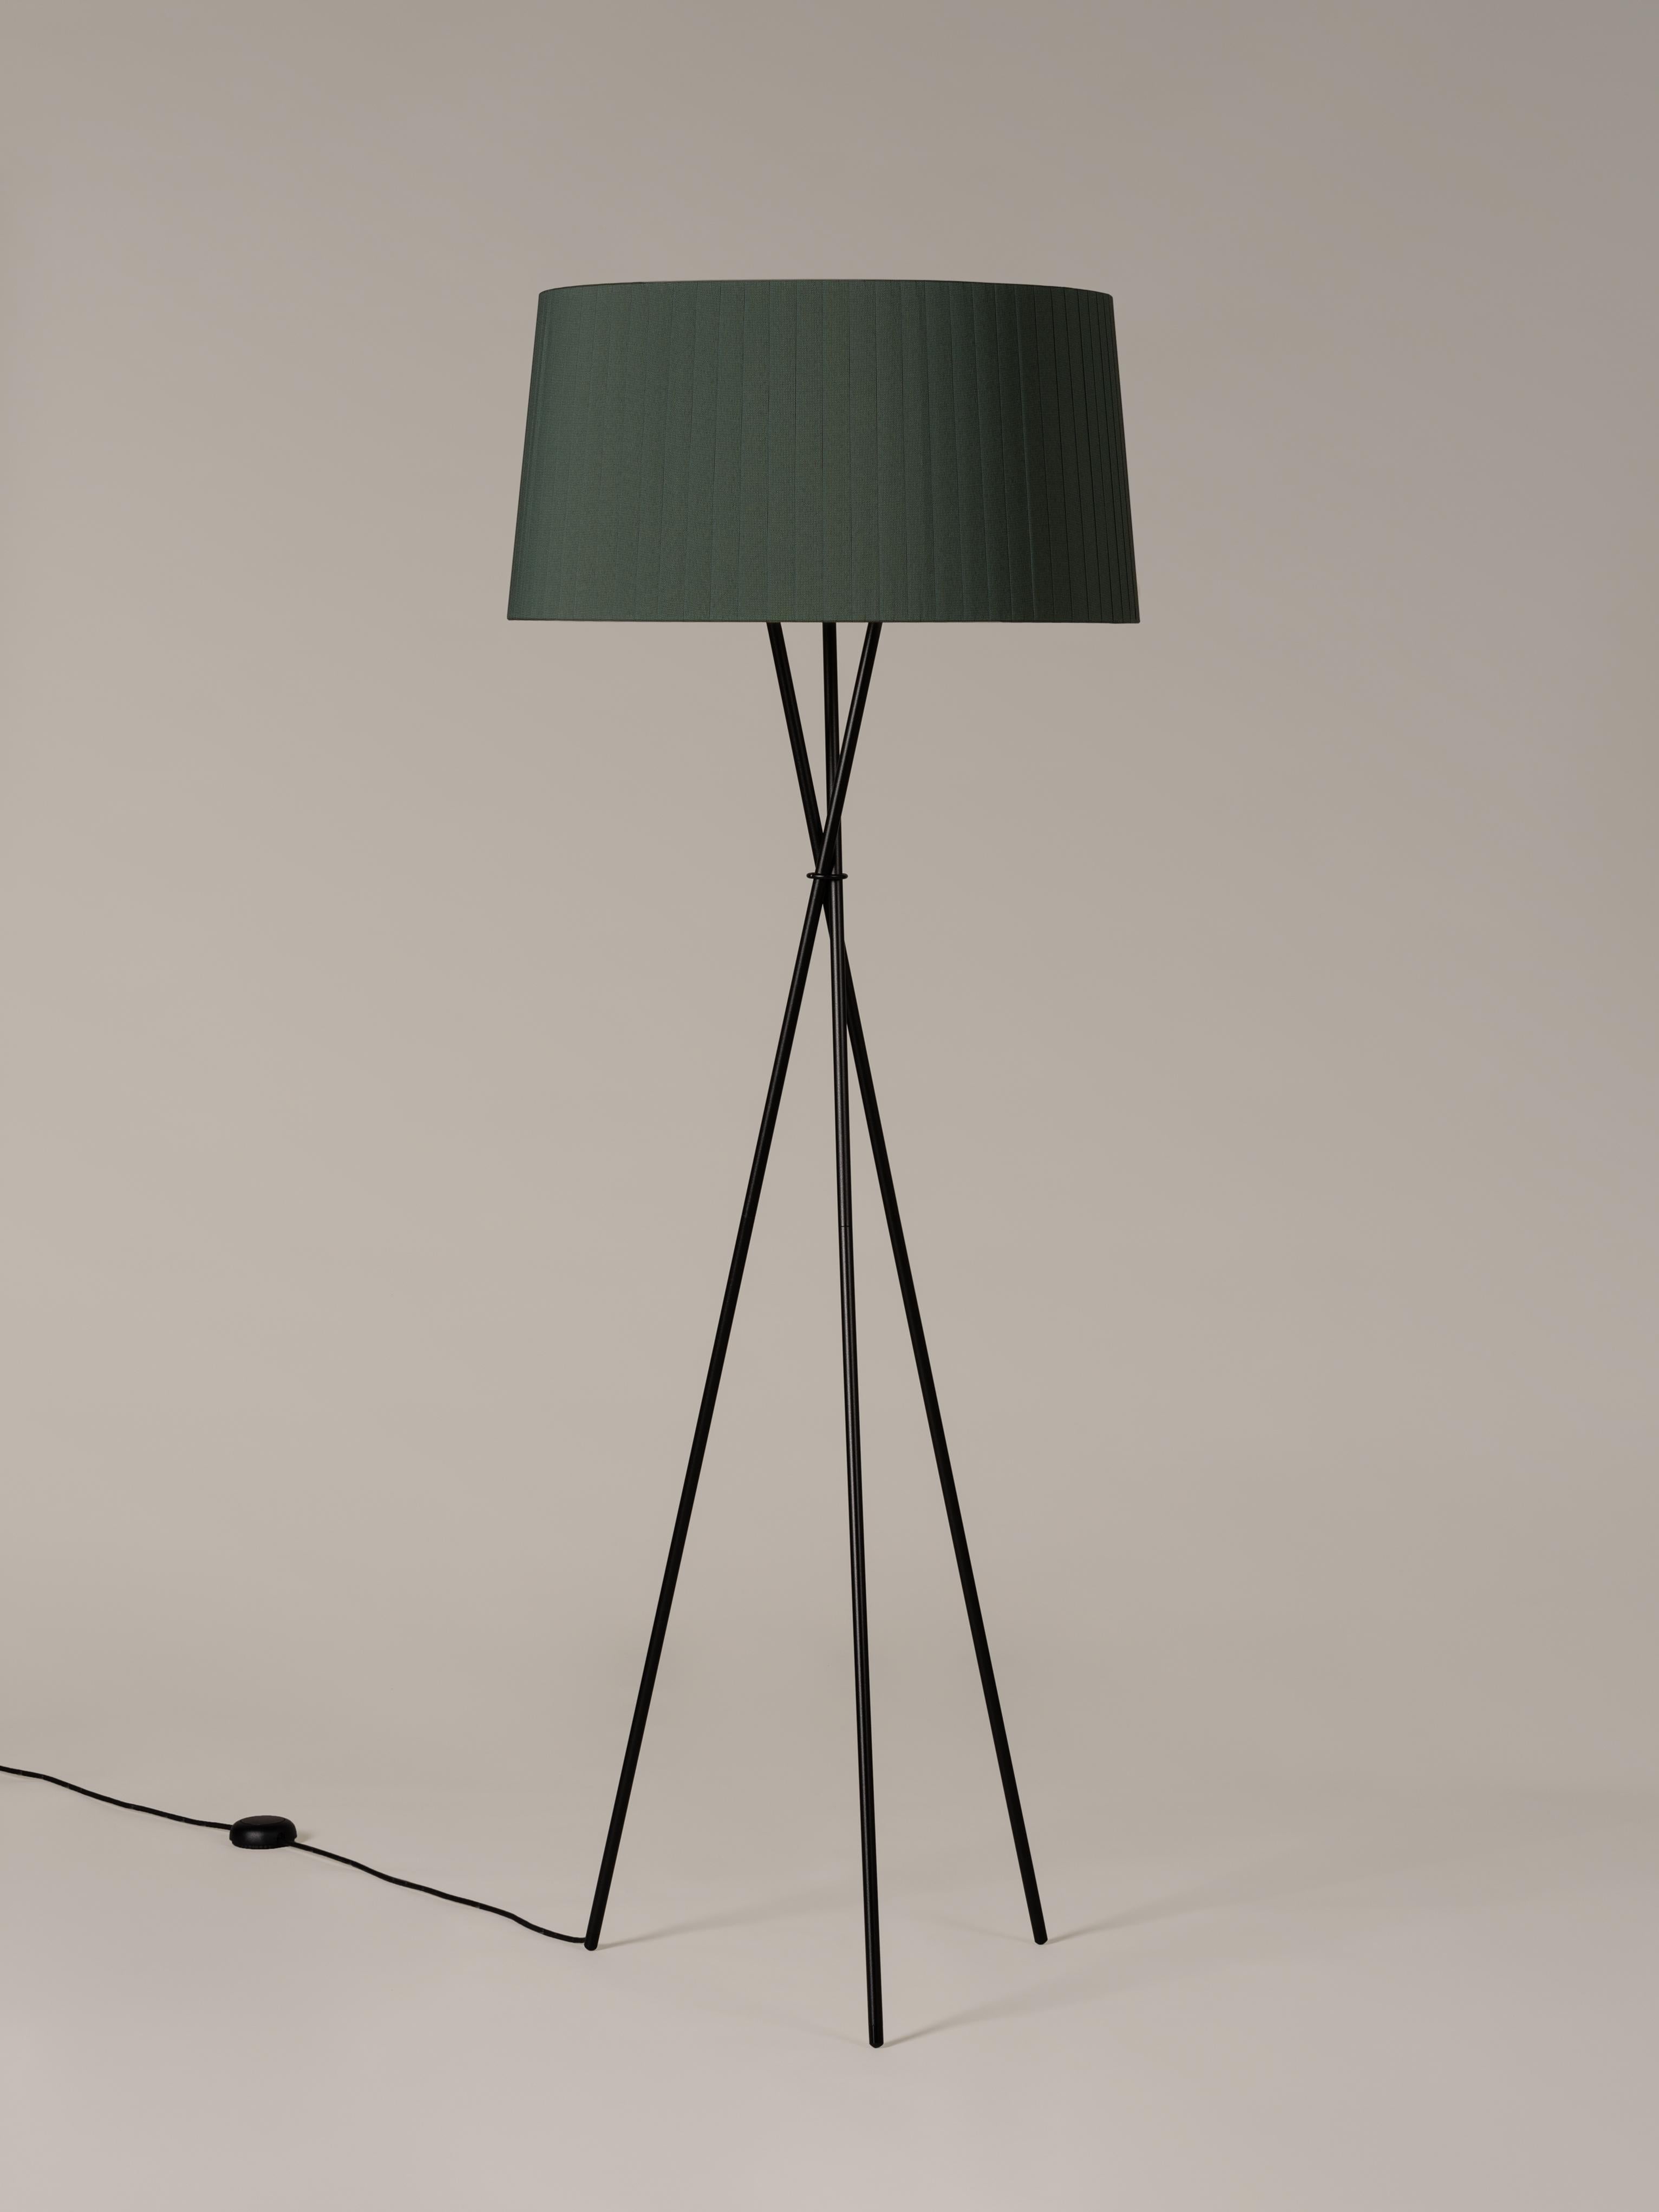 Green trípode G5 floor lamp by Santa & Cole
Dimensions: D 62 x H 168 cm
Materials: Metal, ribbon.
Available in other colors.

Trípode humanises neutral spaces with its colourful and functional sobriety. The shade is hand ribboned and its base